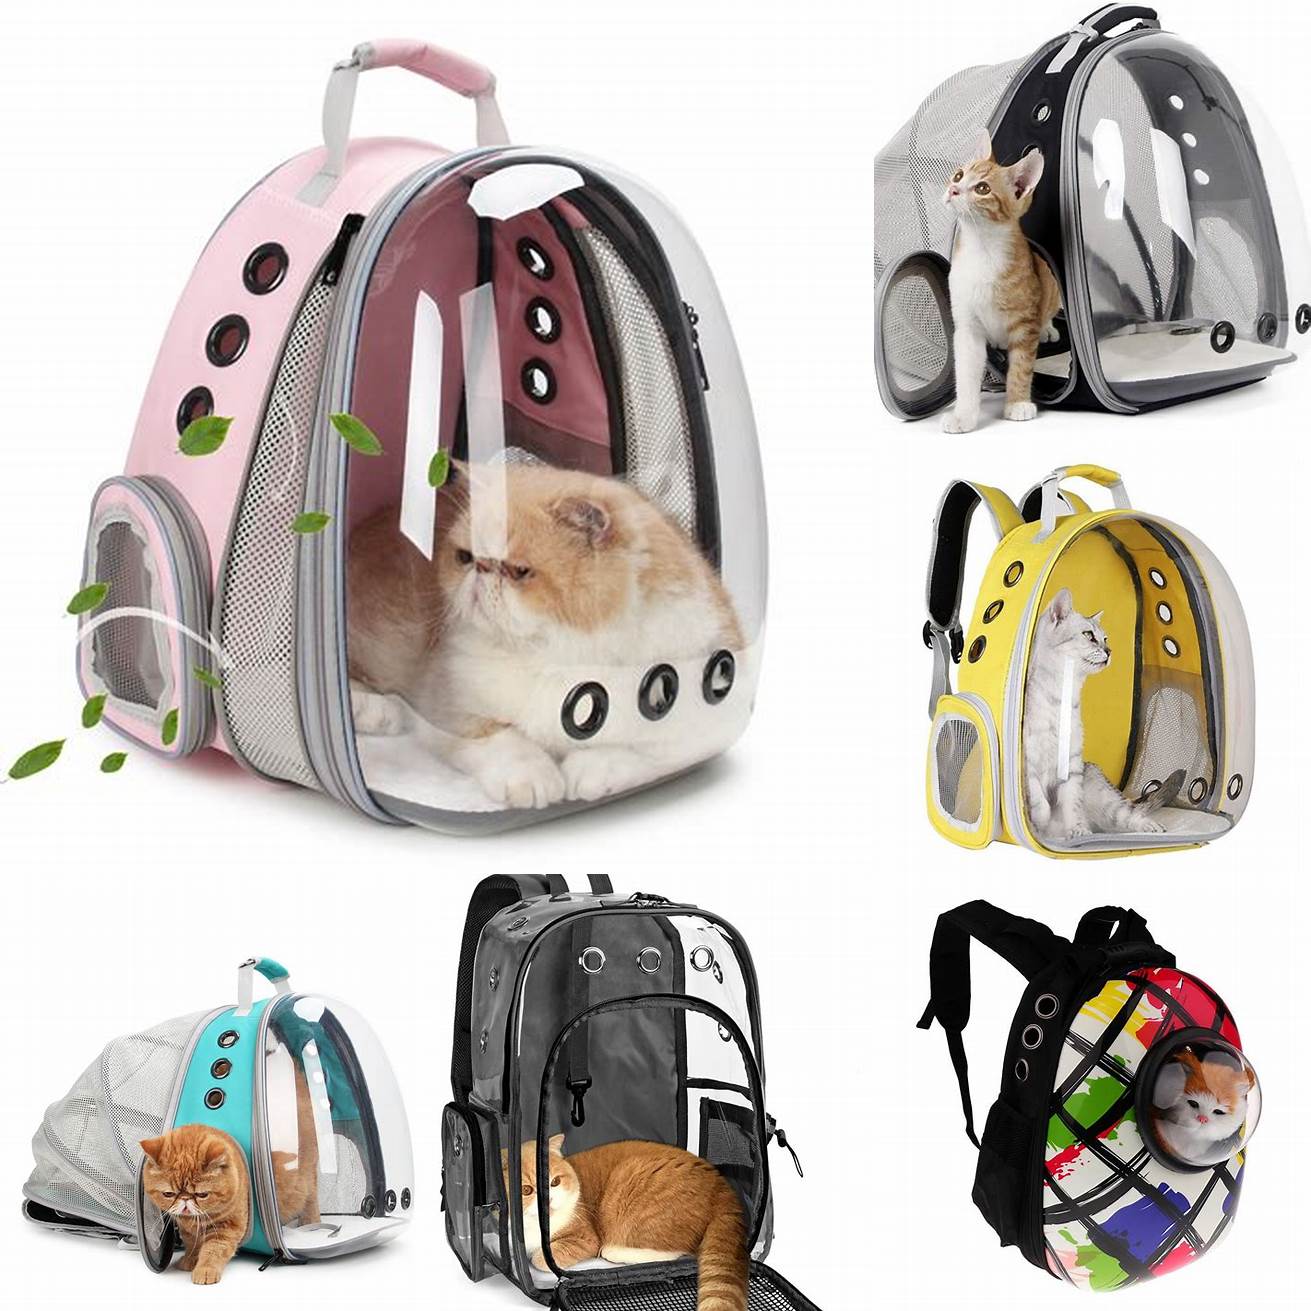 Cat Backpack with Mesh Windows